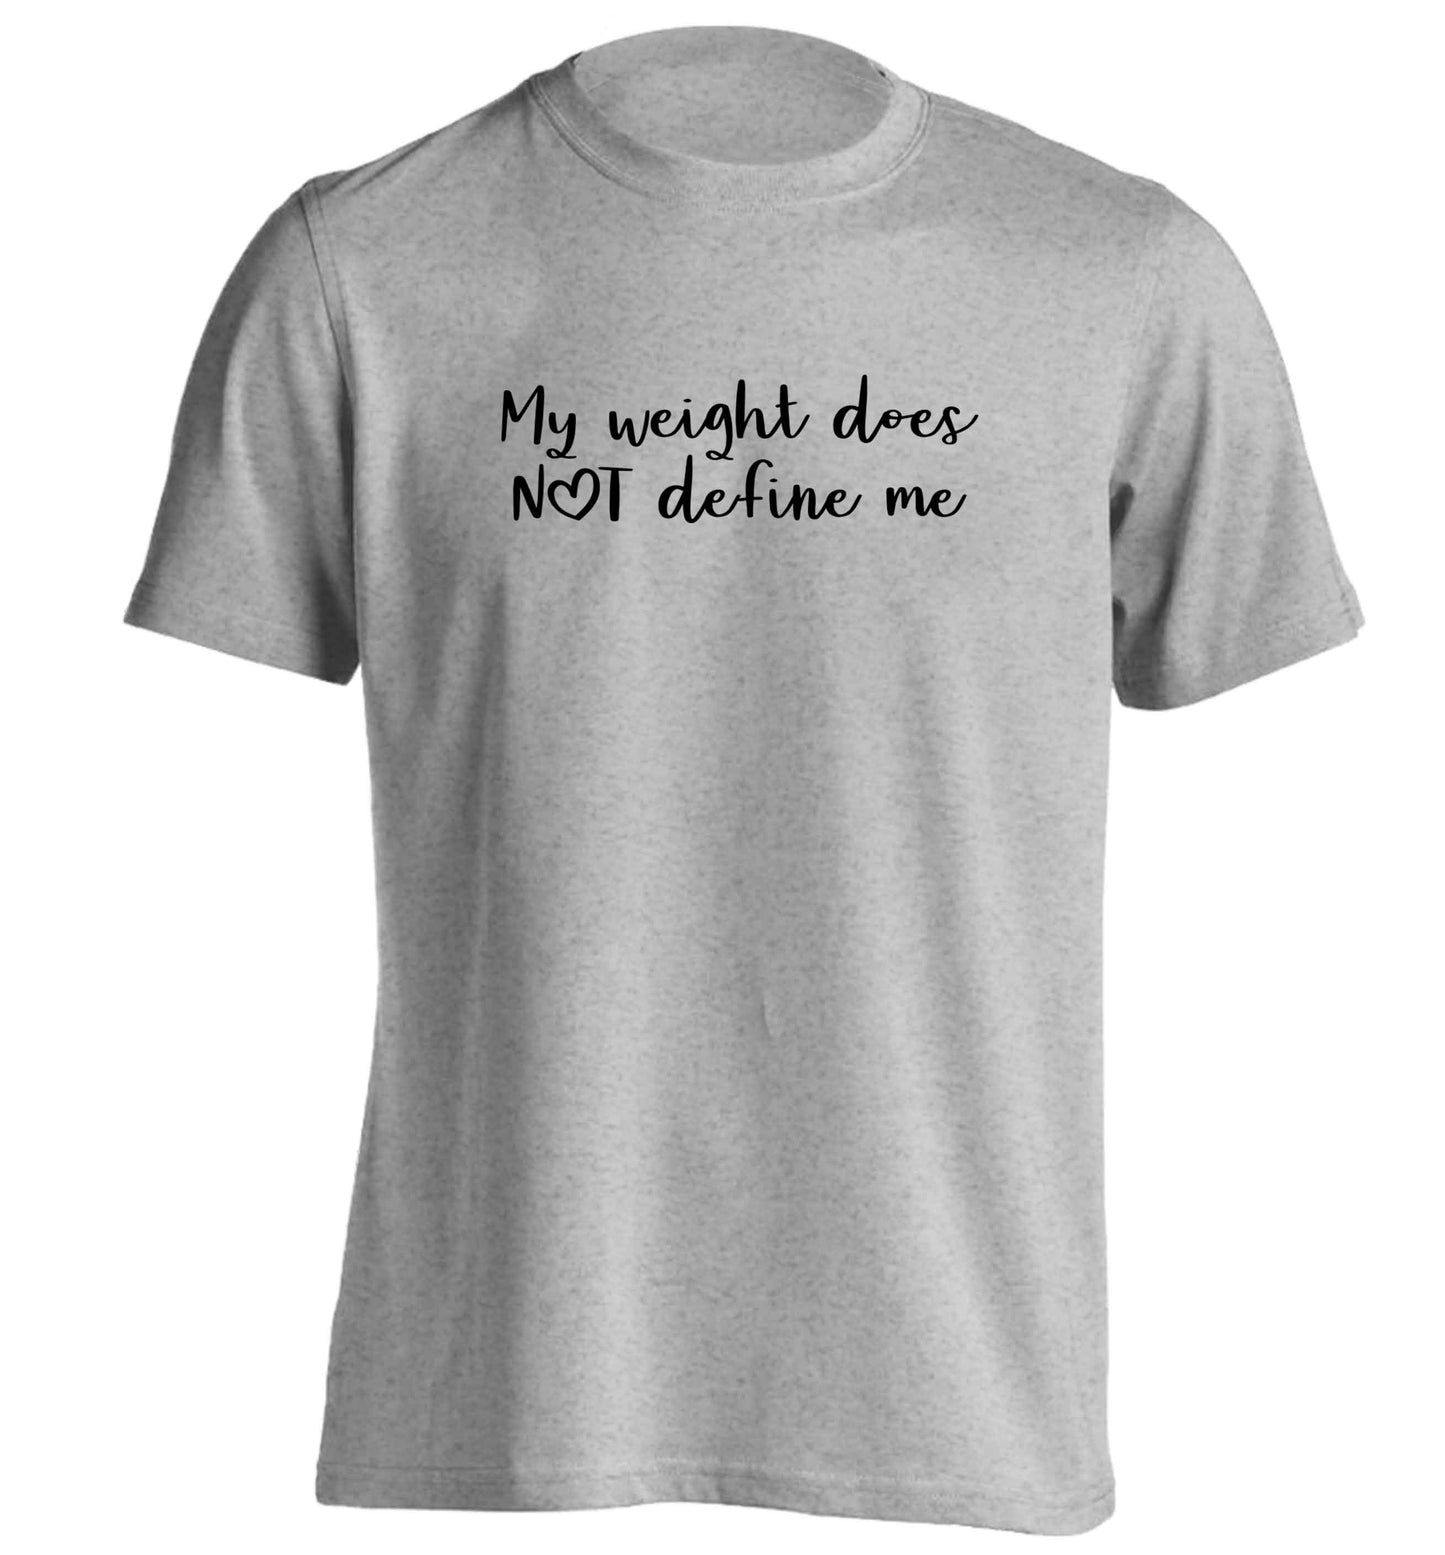 My weight does not define me adults unisex grey Tshirt 2XL